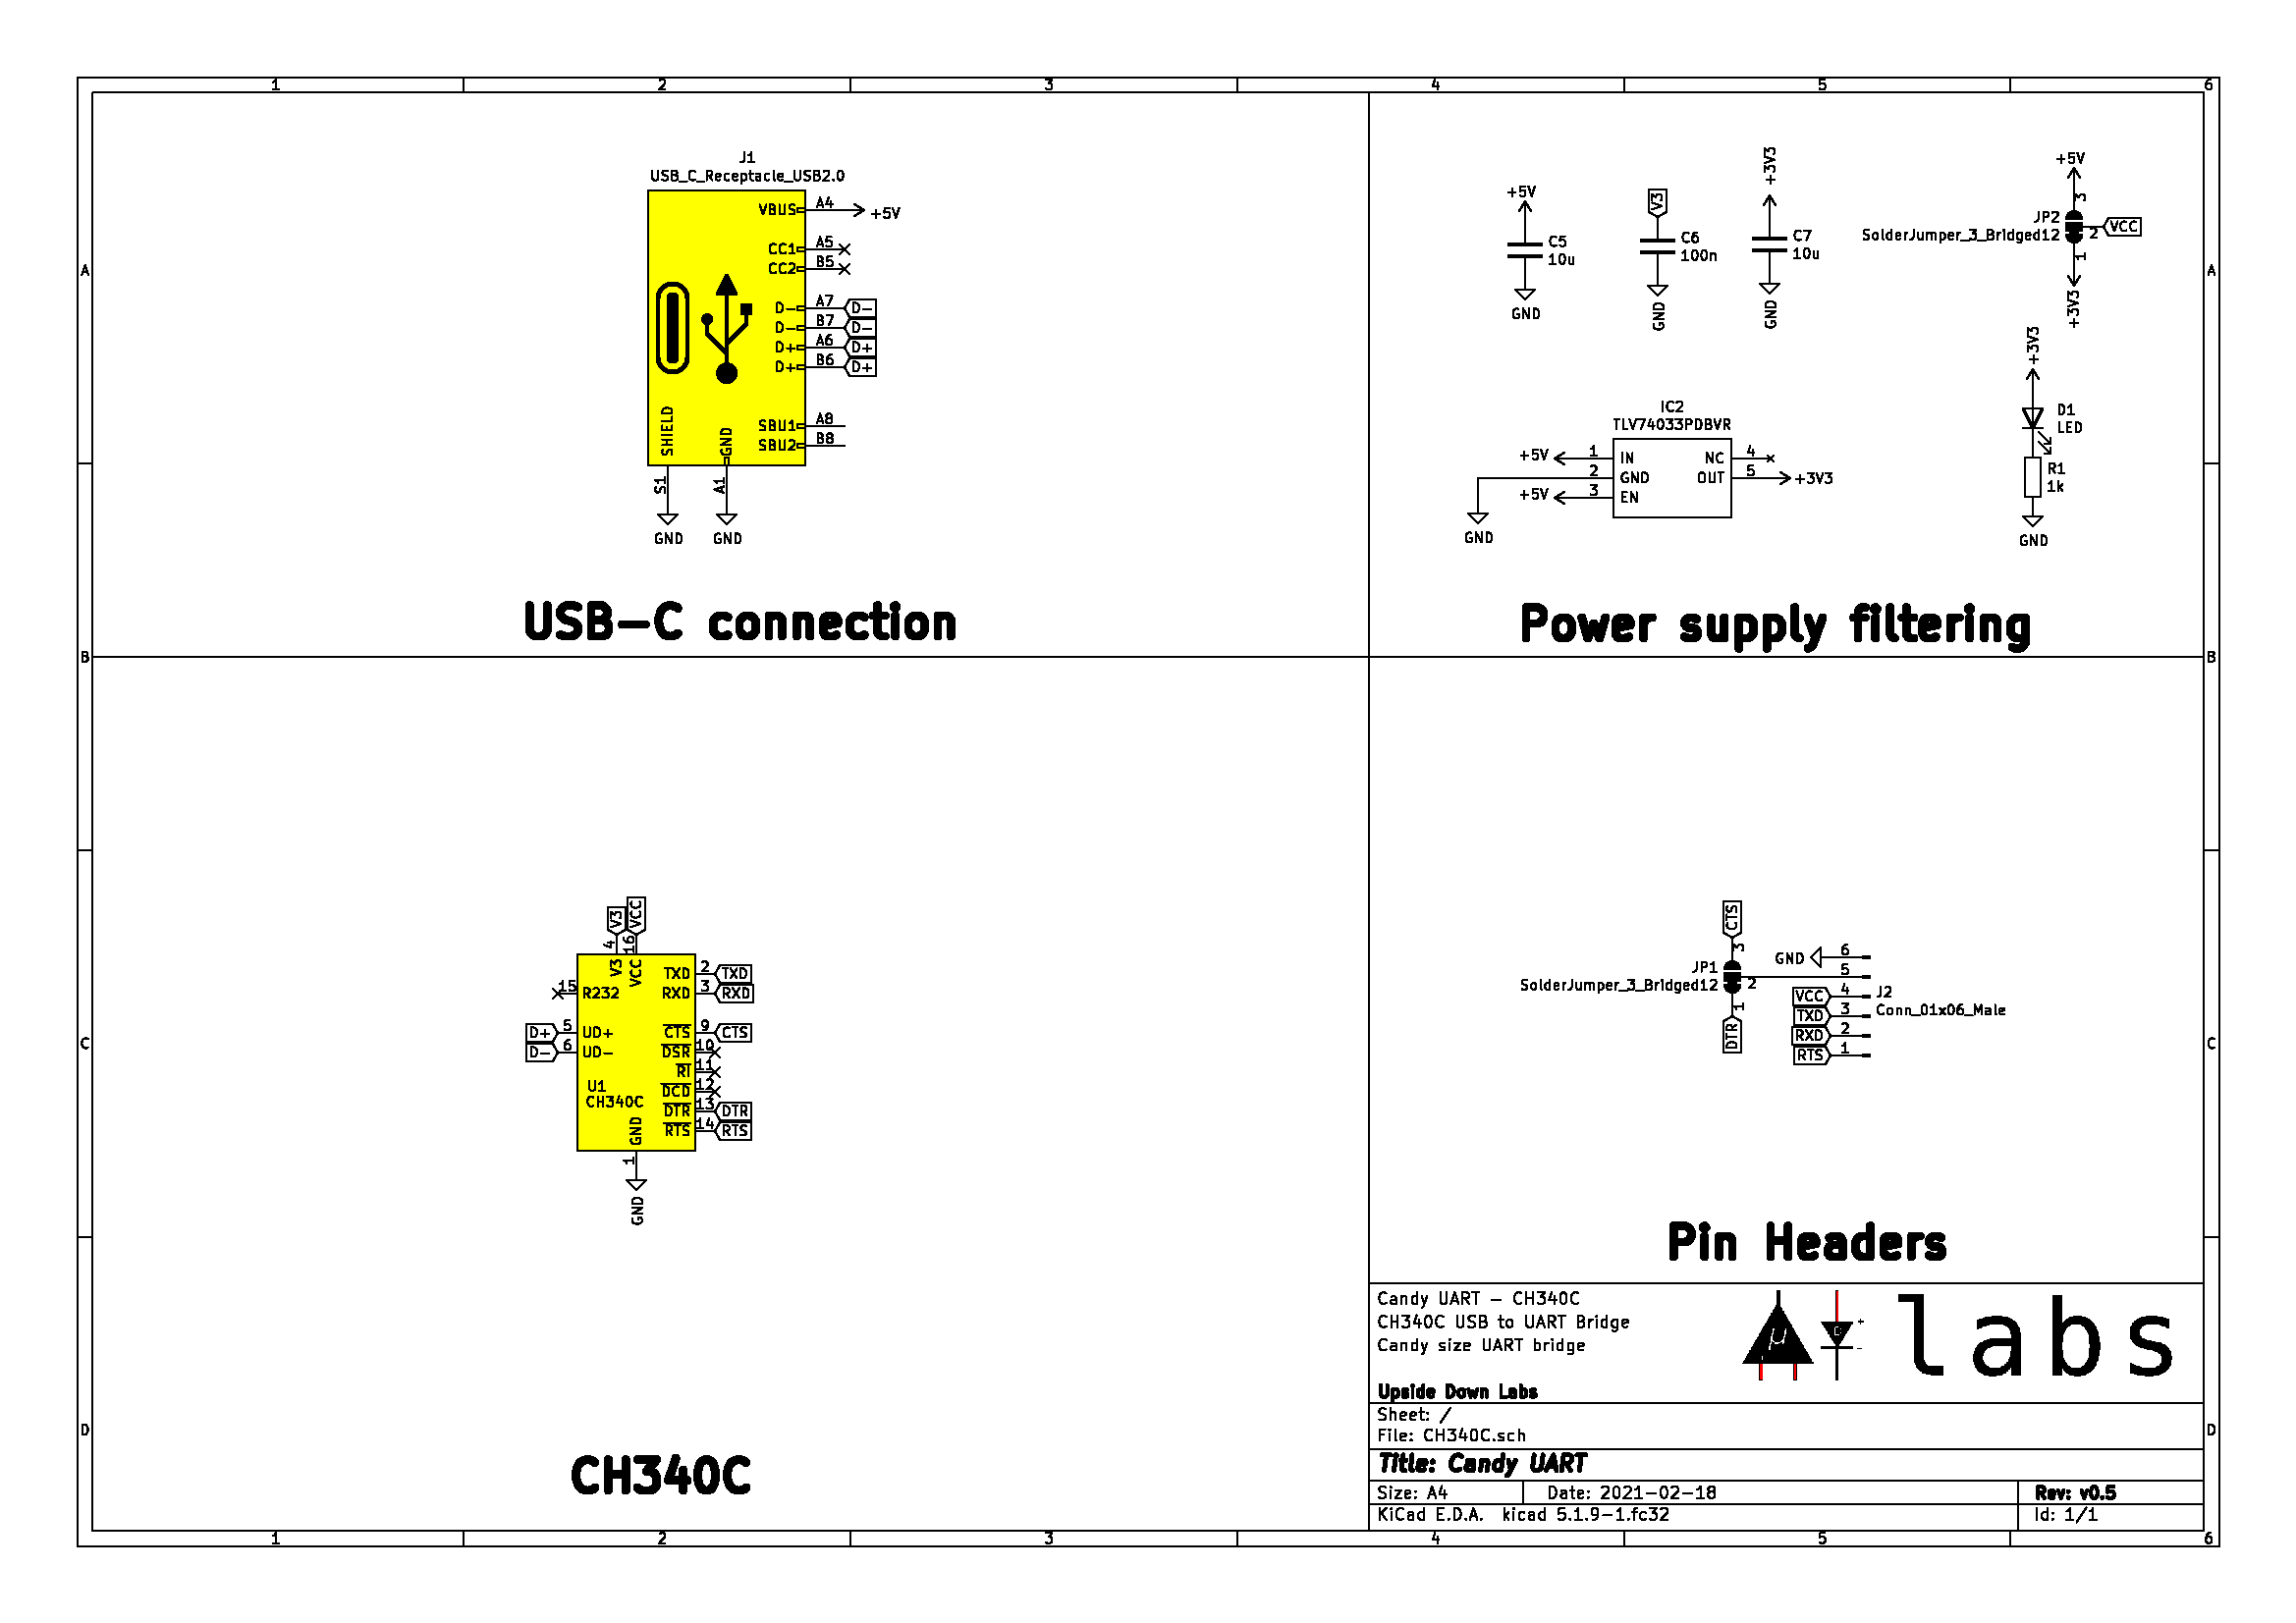 Upside Down Labs Candy UART - CH340C schematic